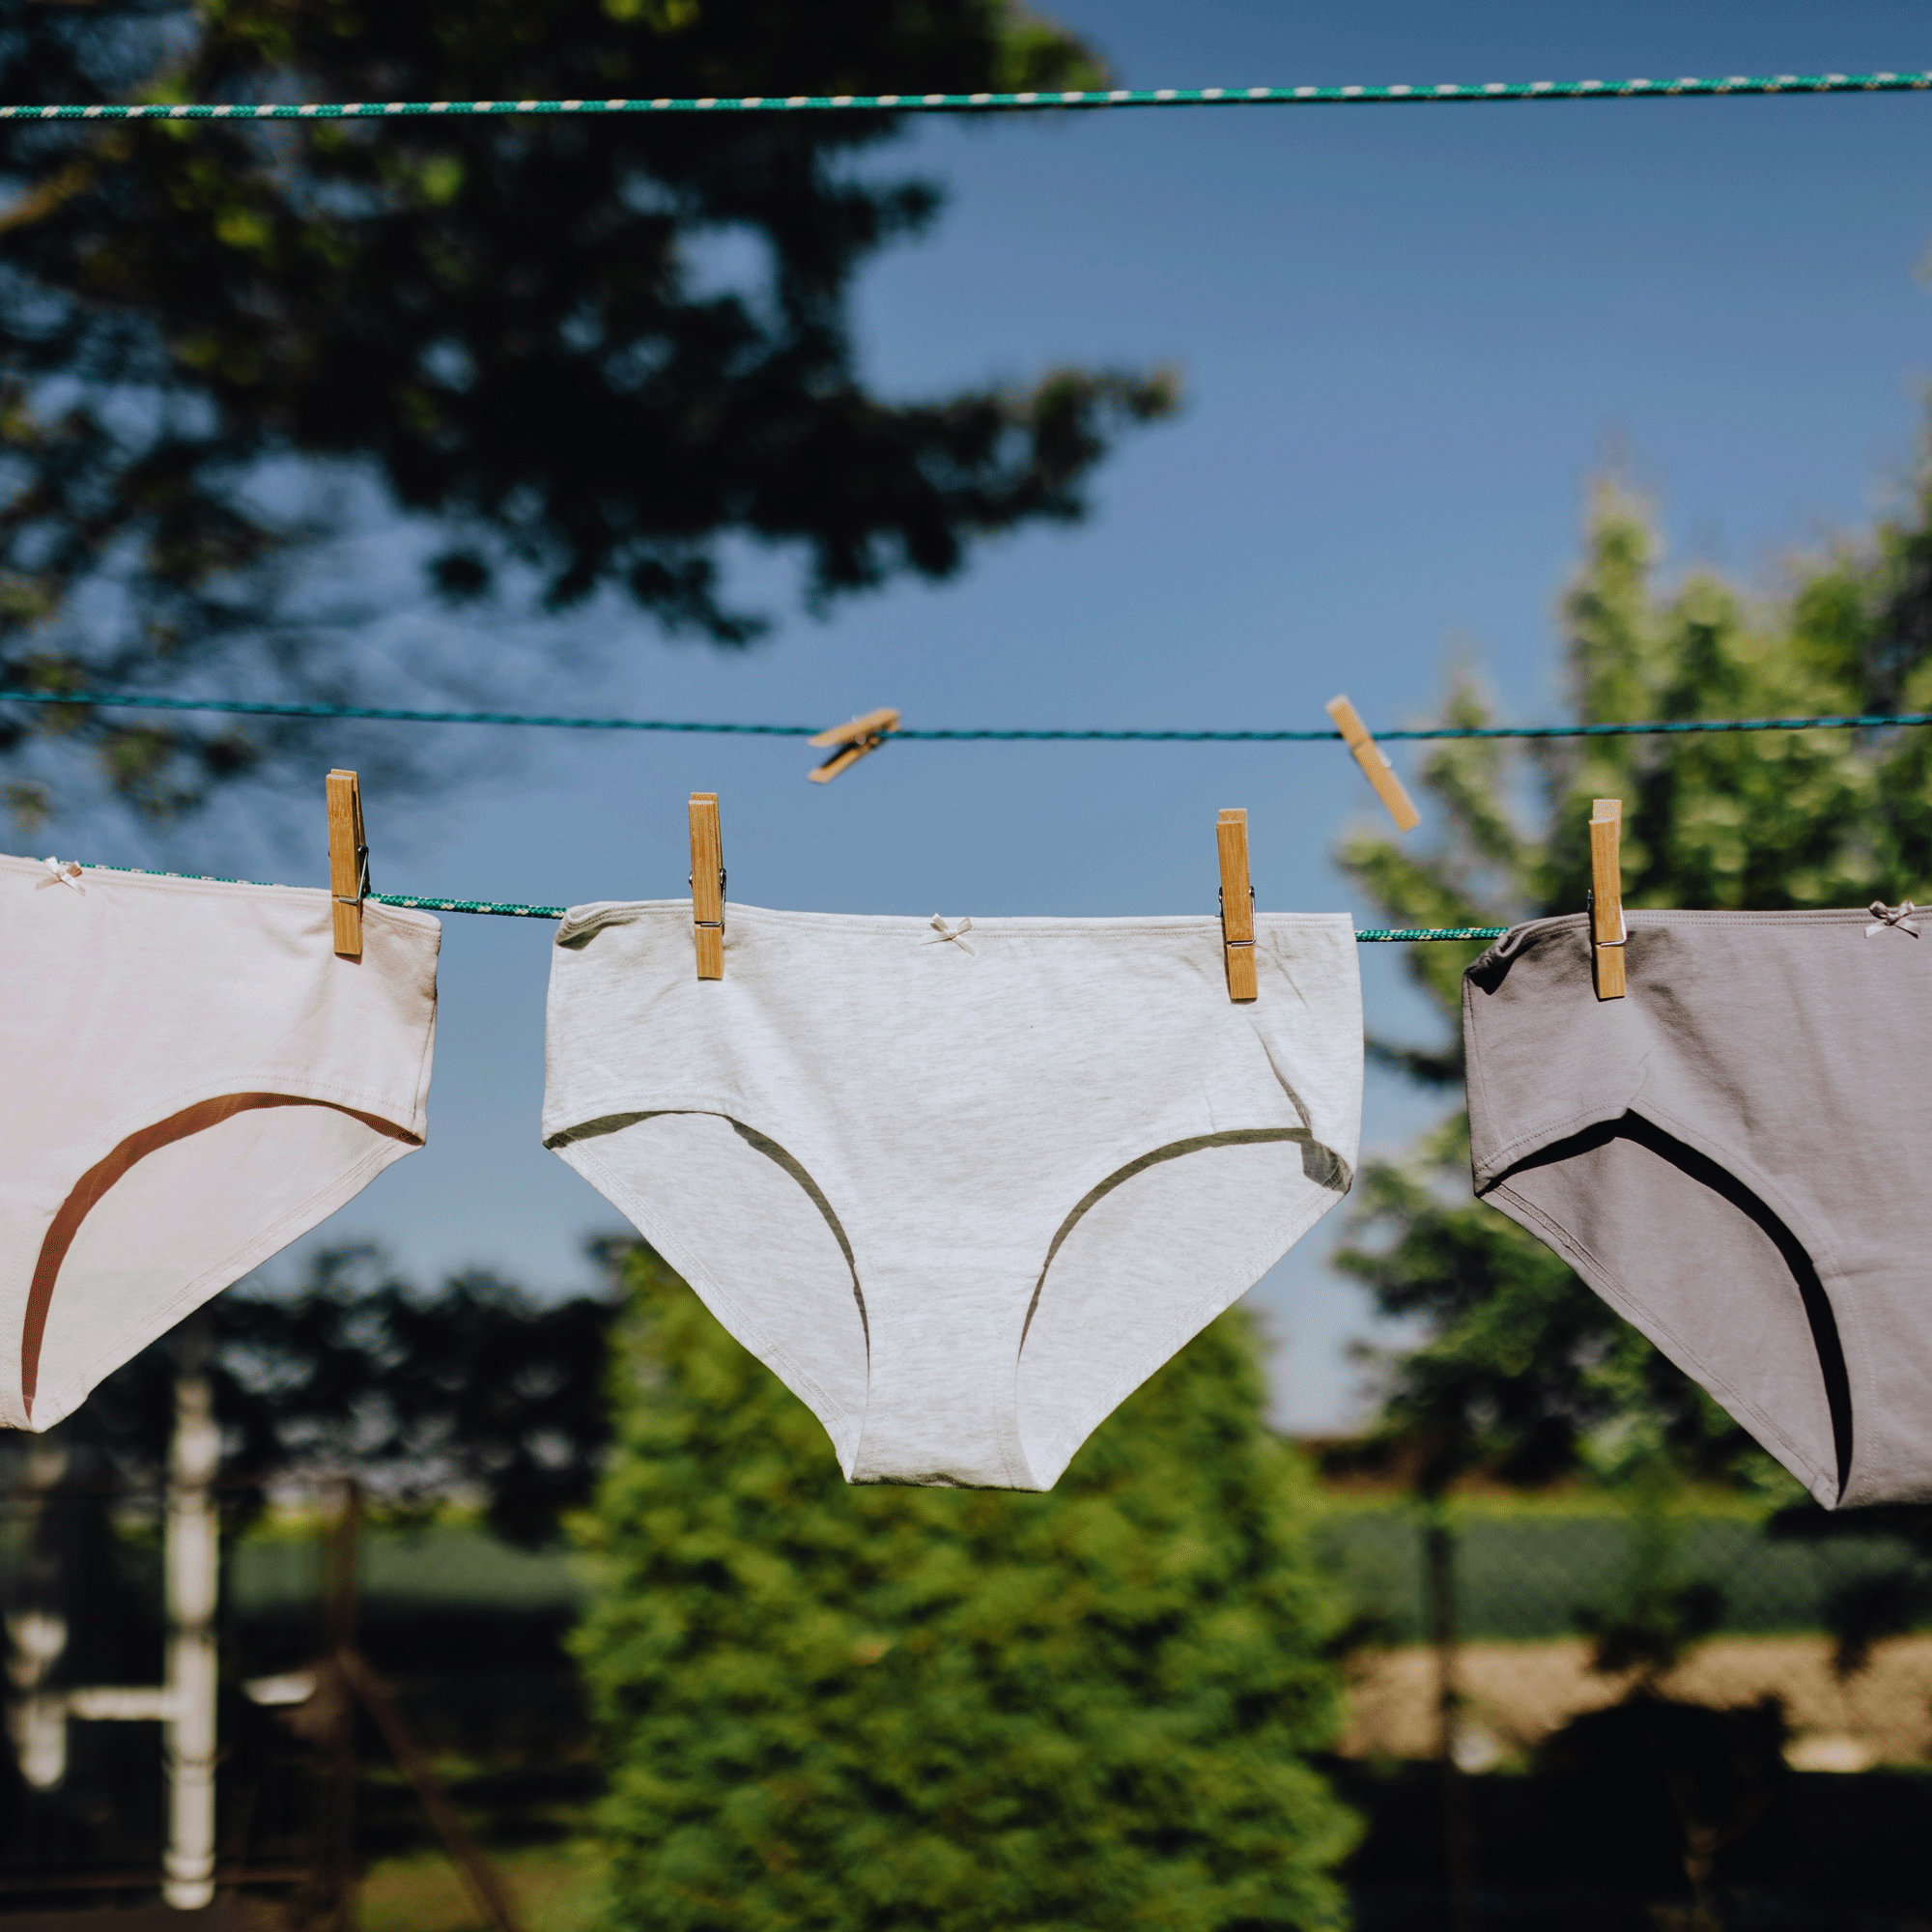 What to Do with Old Clothes - Where to Recycle Underwear & more